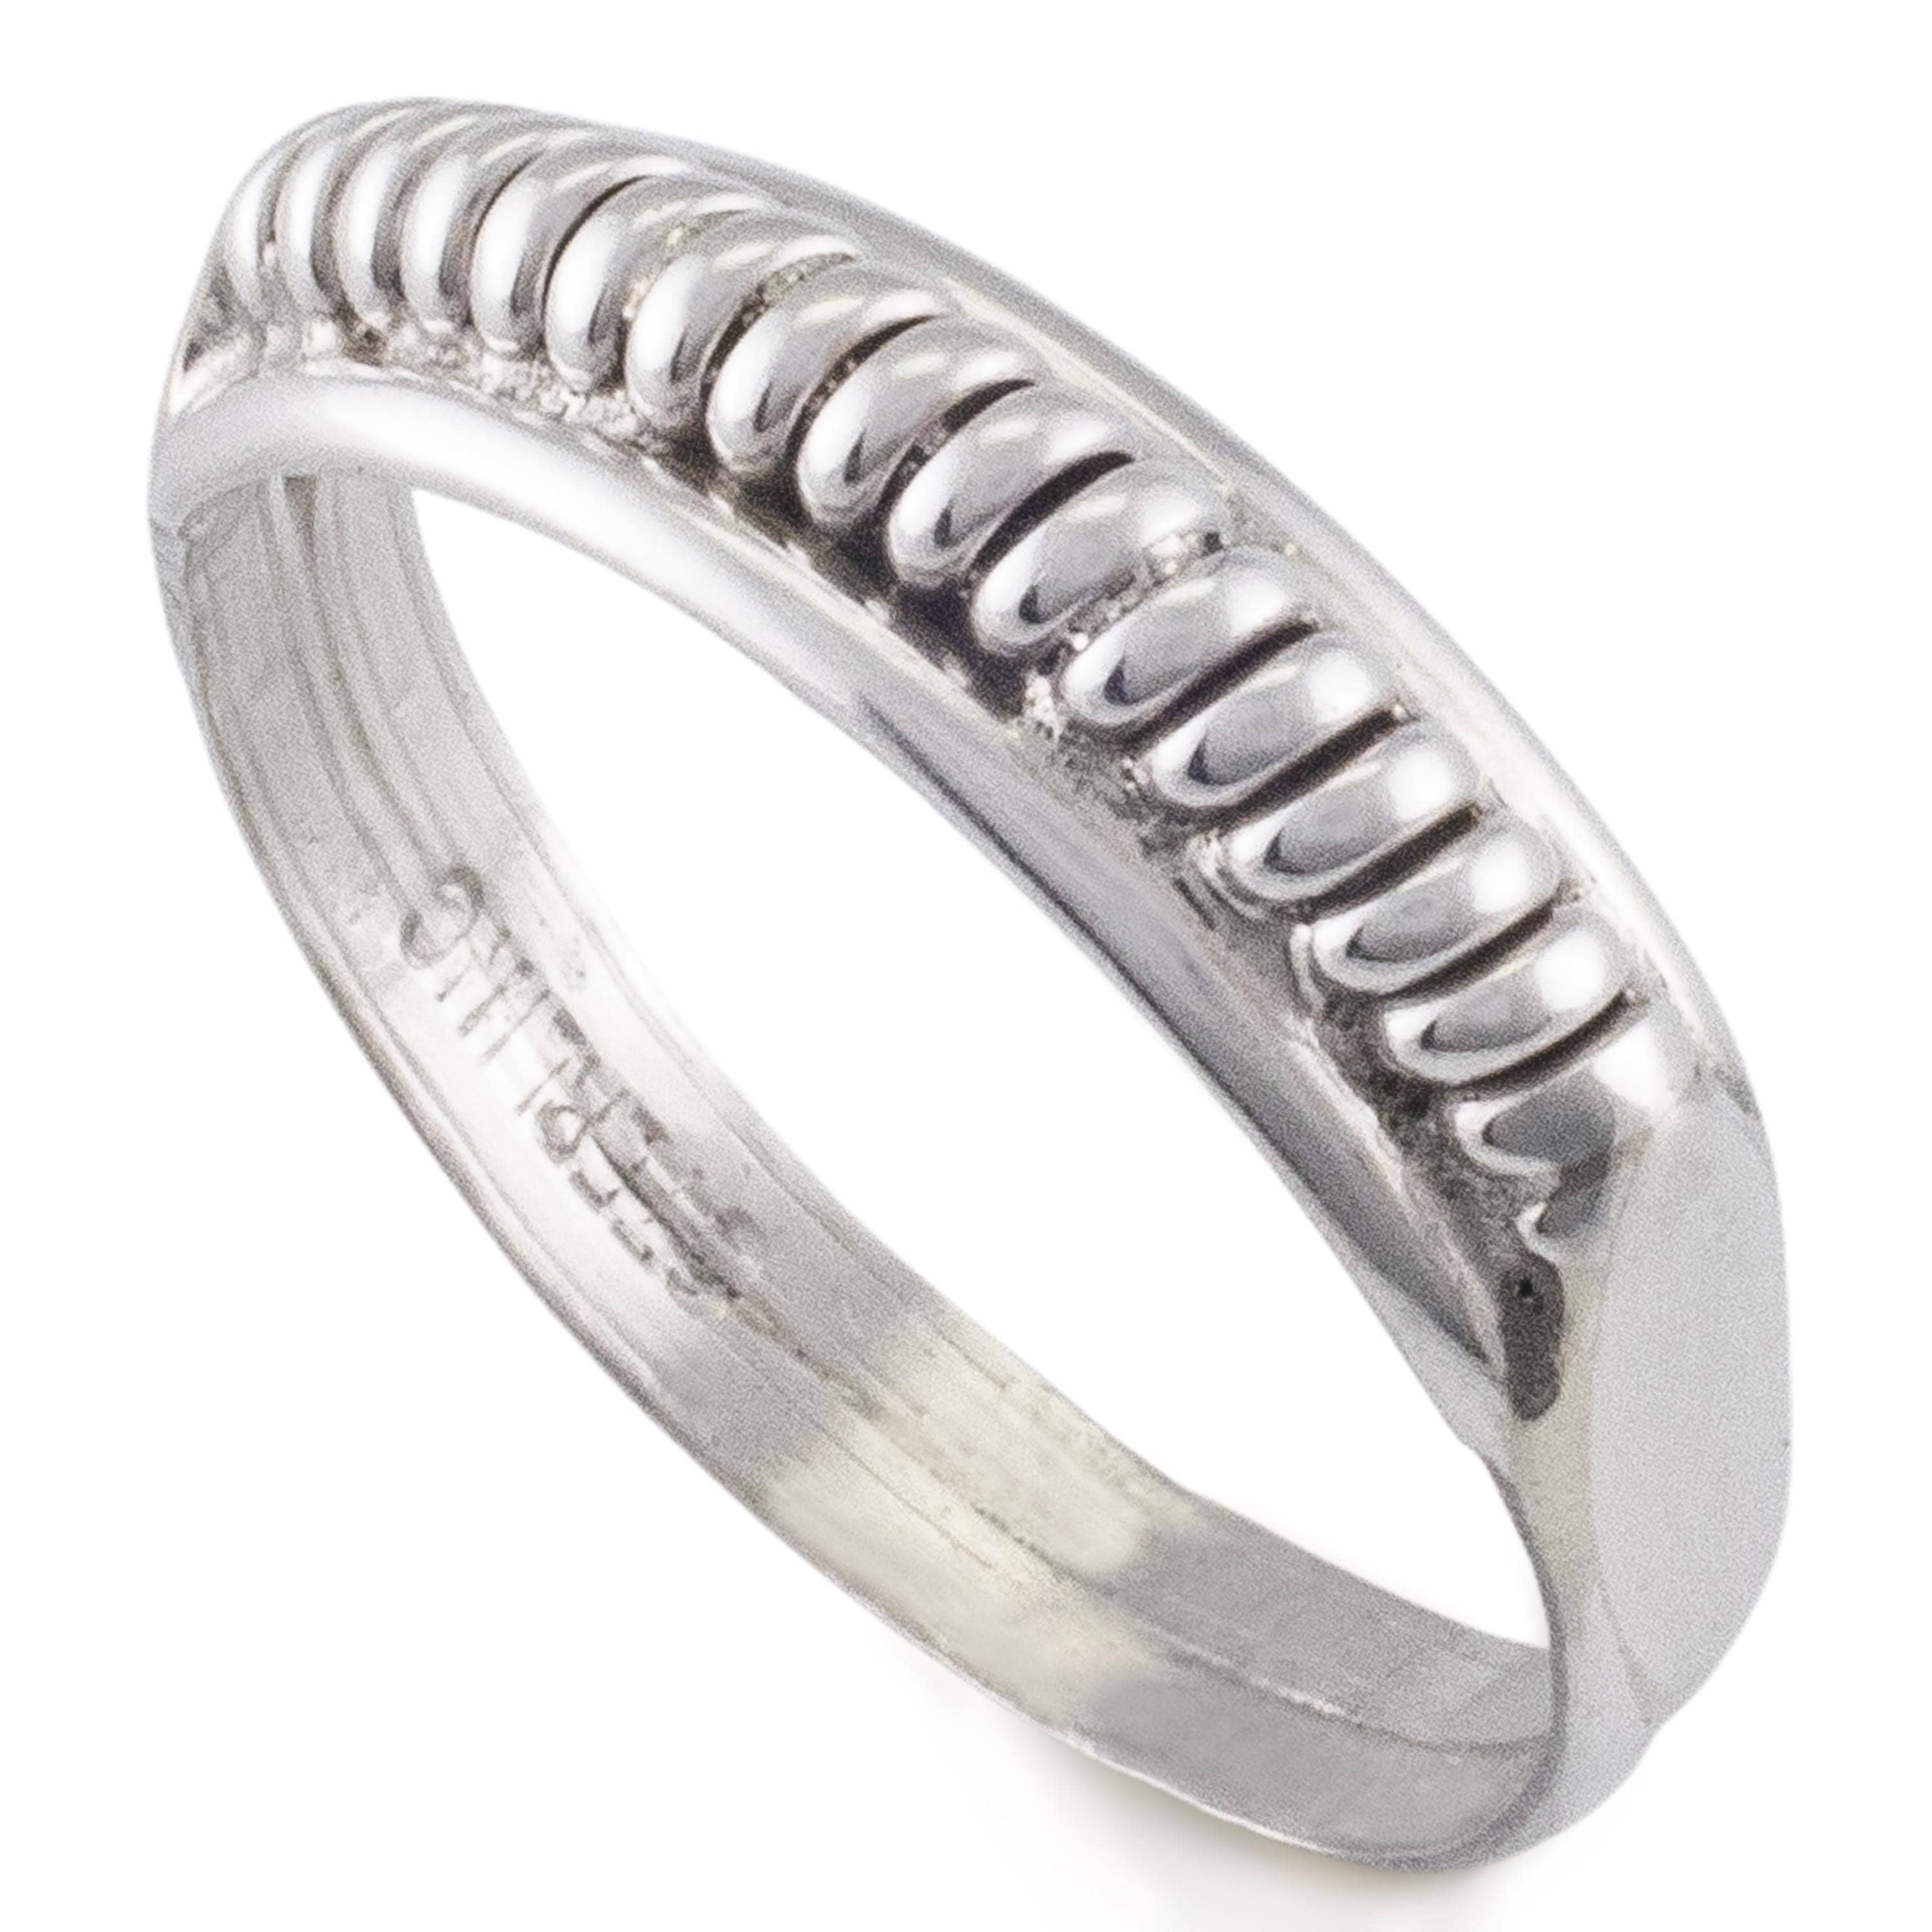 Kalifano Native American Jewelry 925 Sterling Silver Braided Rope USA Native American Made Ring